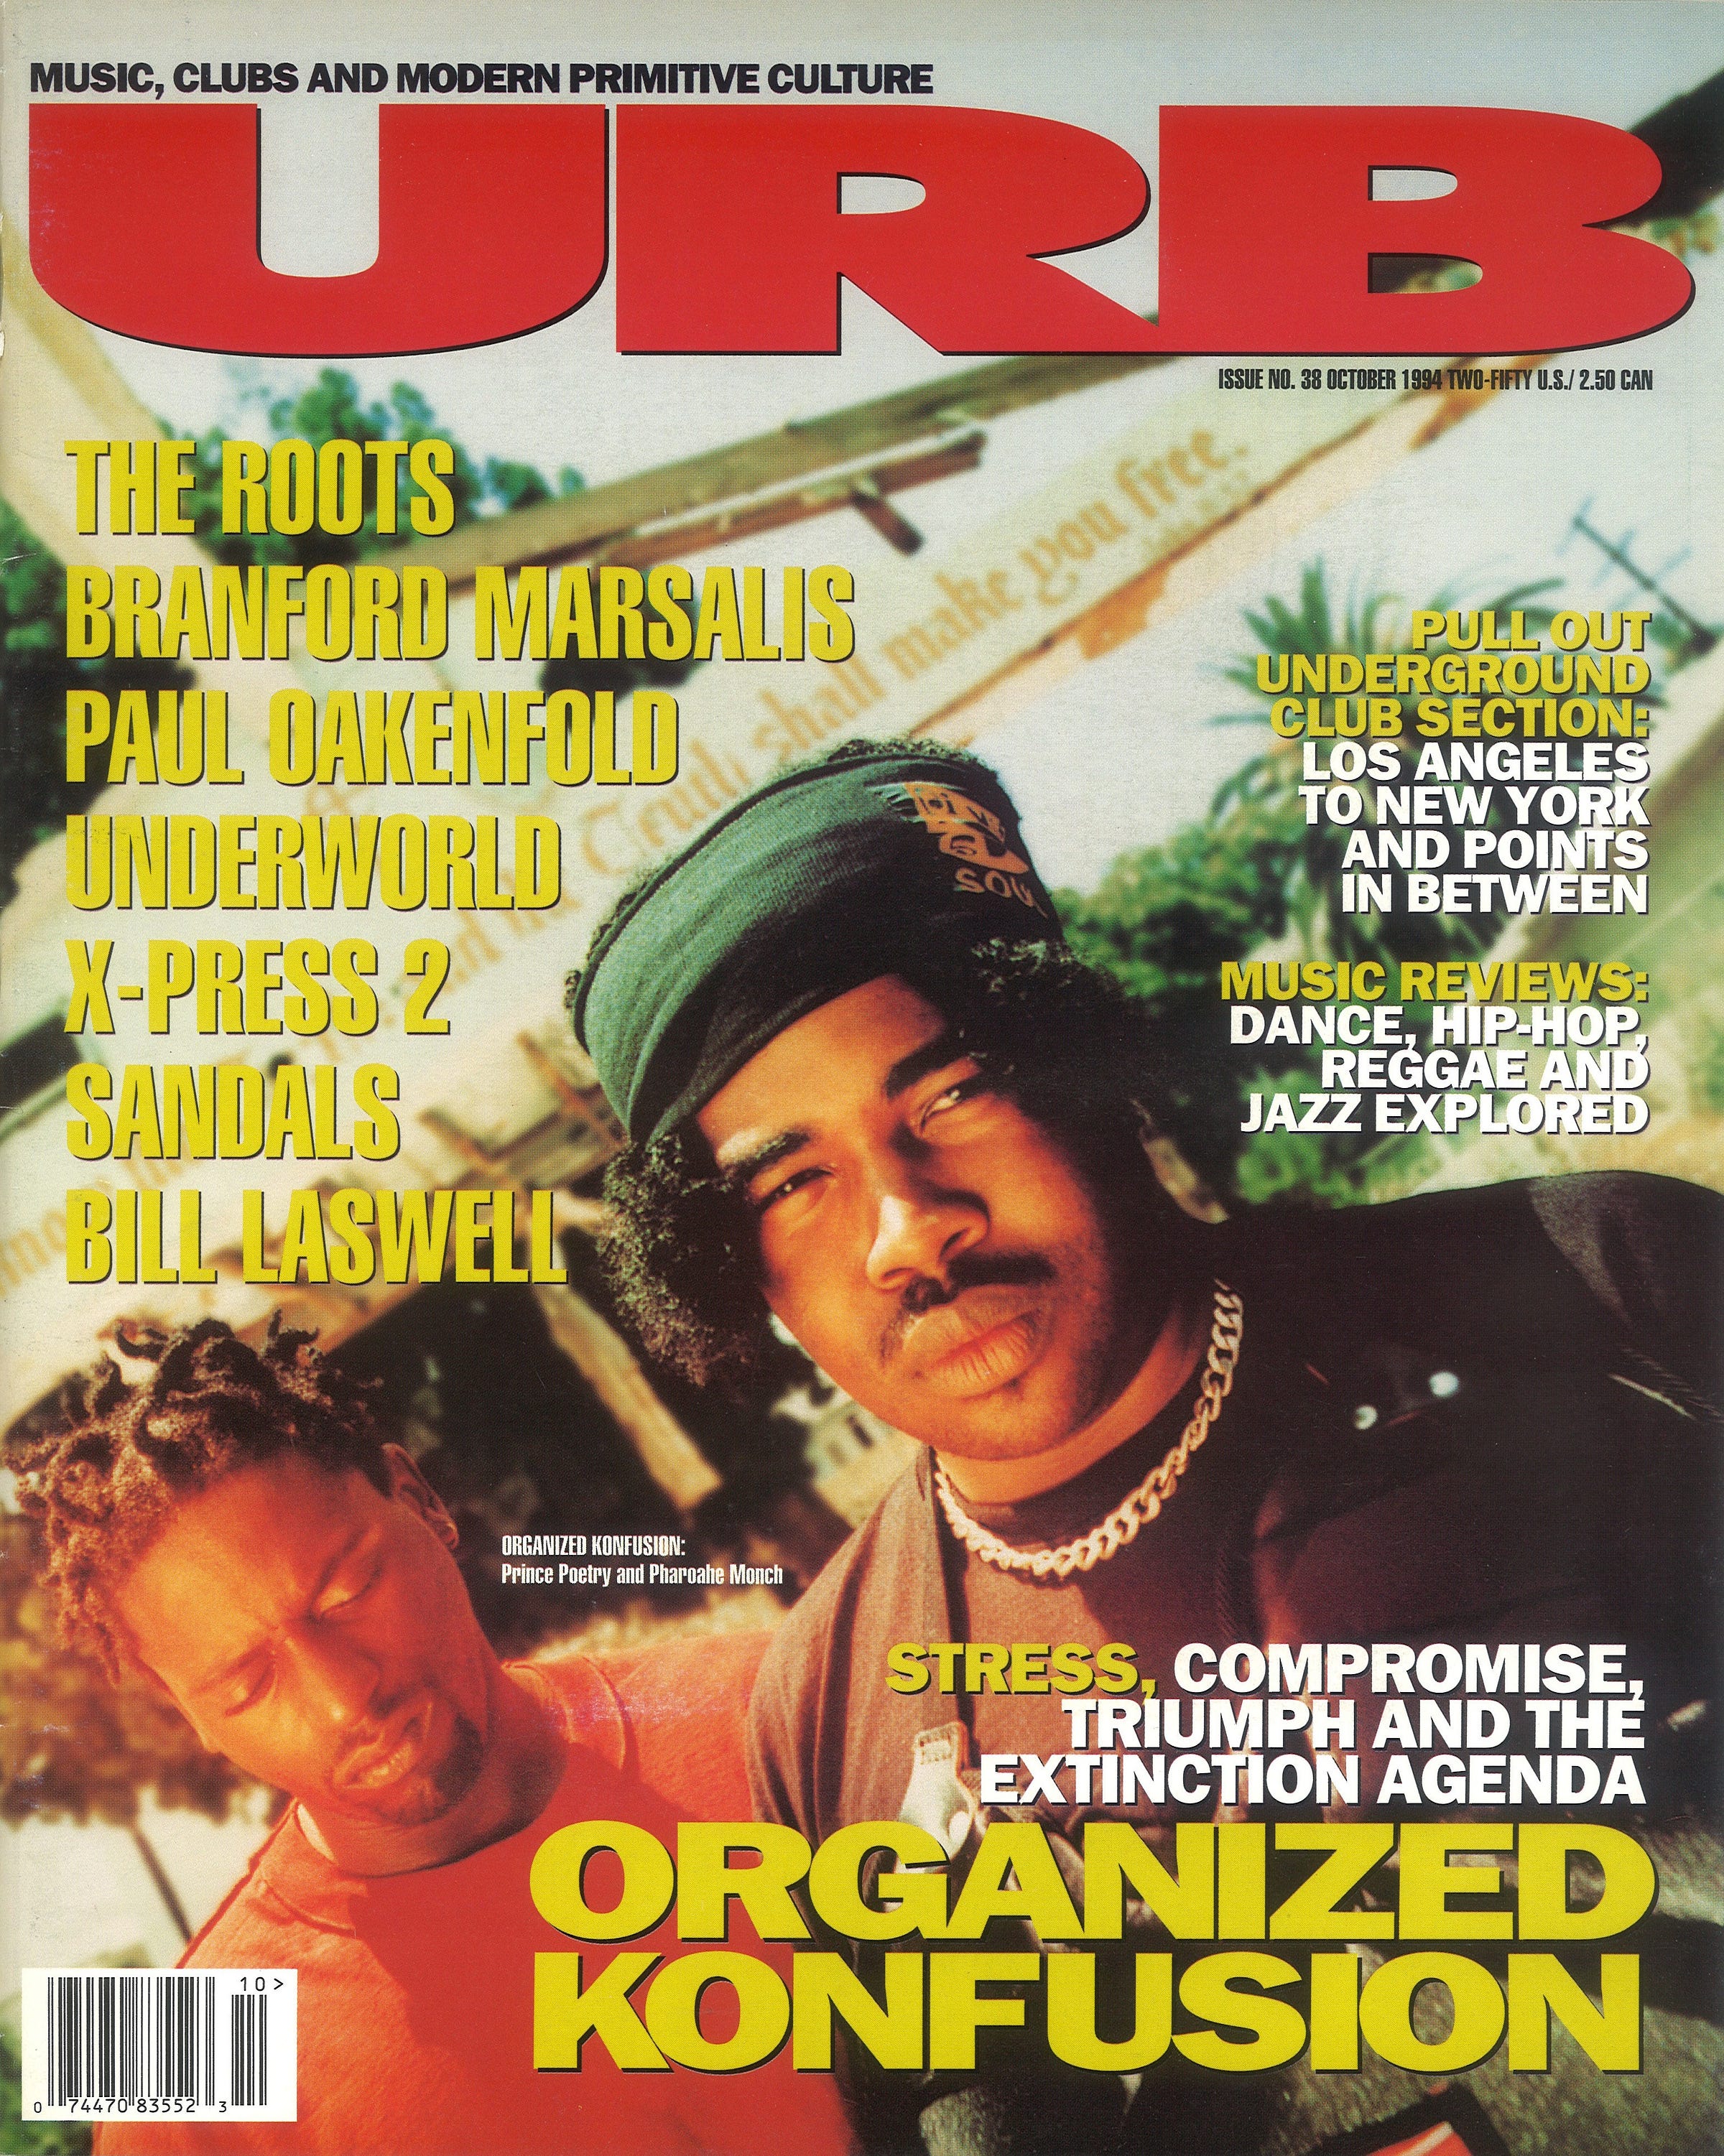 Organized Konfusion photographed by B+ (aka Brian Cross) in 1994. The issue also featured Underworld, The Roots, and Paul Oakenfold.